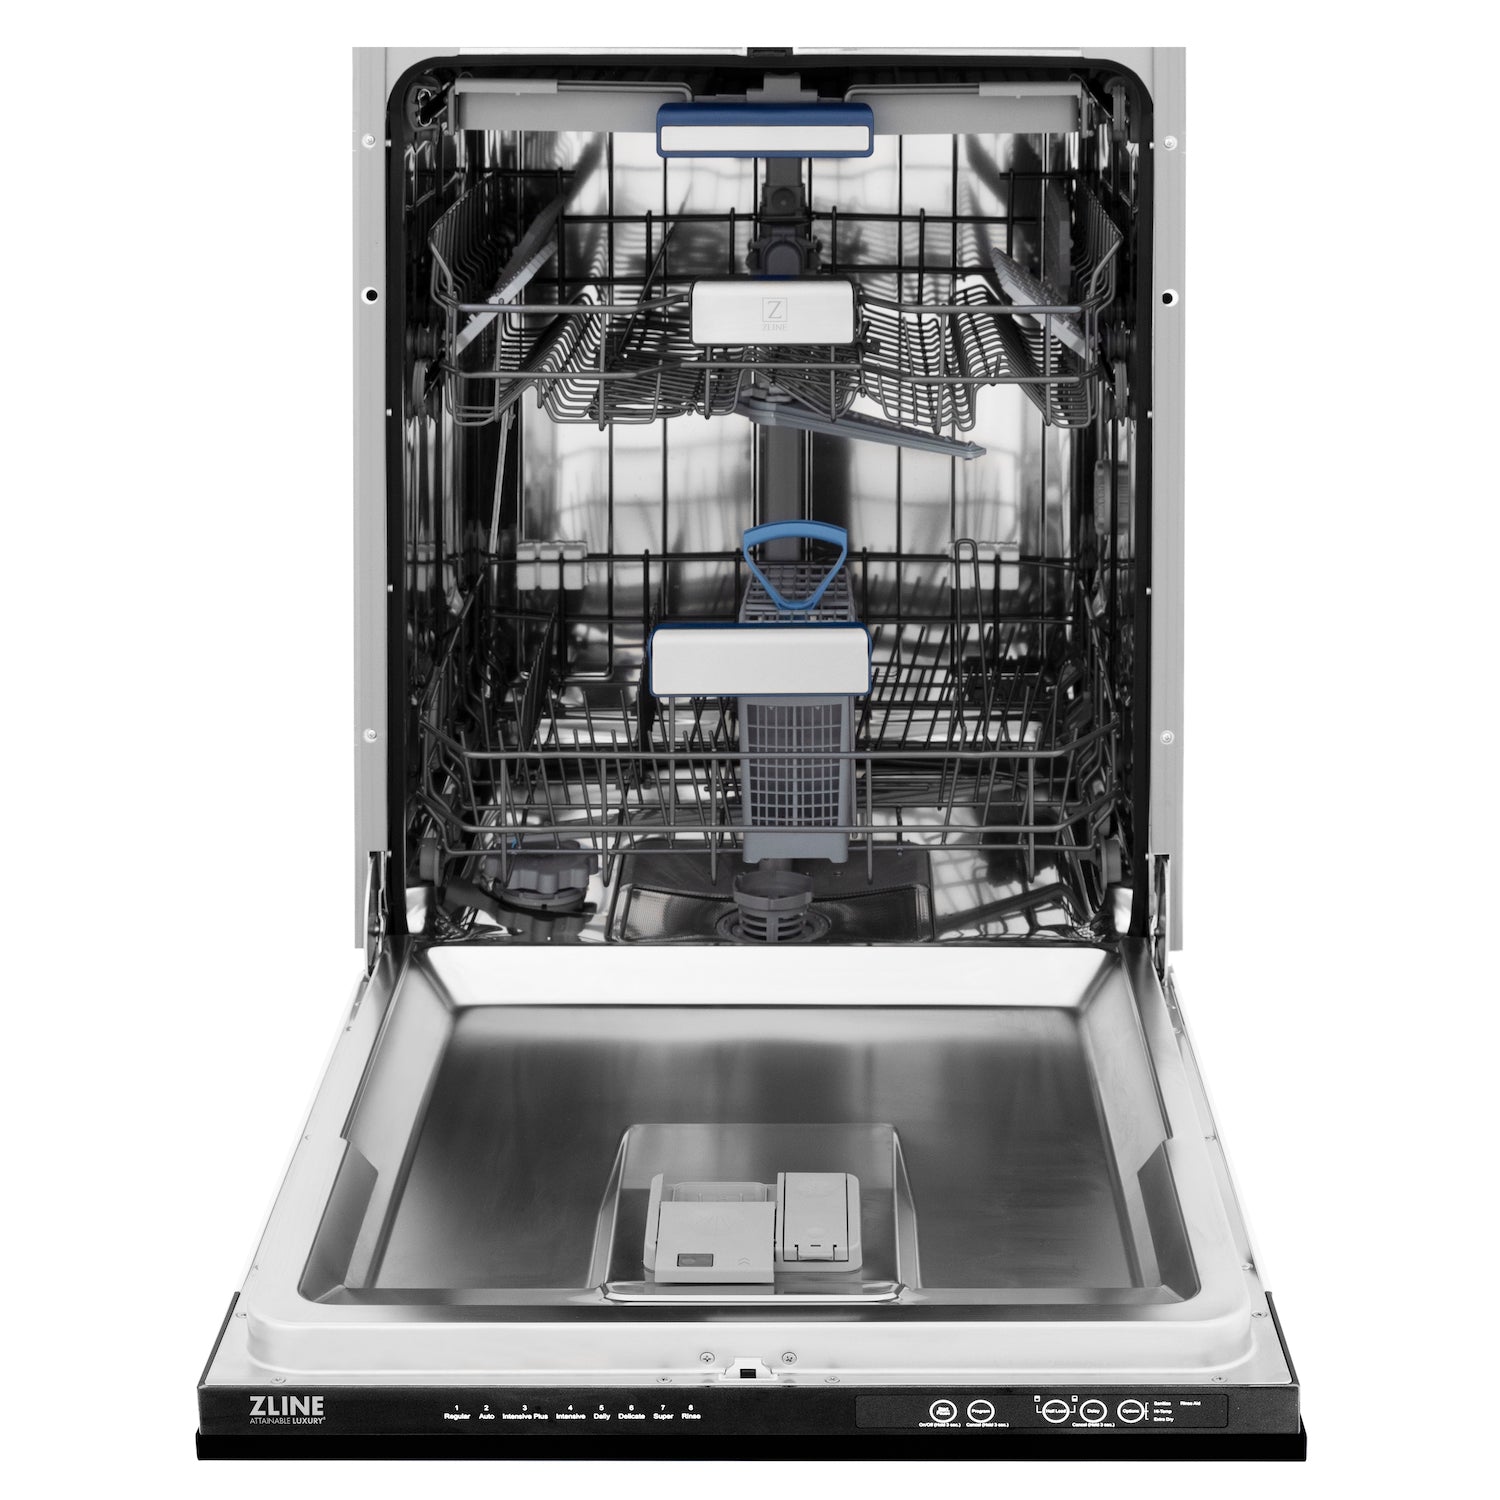 ZLINE Autograph Edition 24 in. Tallac Series 3rd Rack Top Control Built-In Tall Tub Dishwasher in Black Stainless Steel with Champagne Bronze Handle, 51dBa (DWVZ-BS-24-CB) front, open.